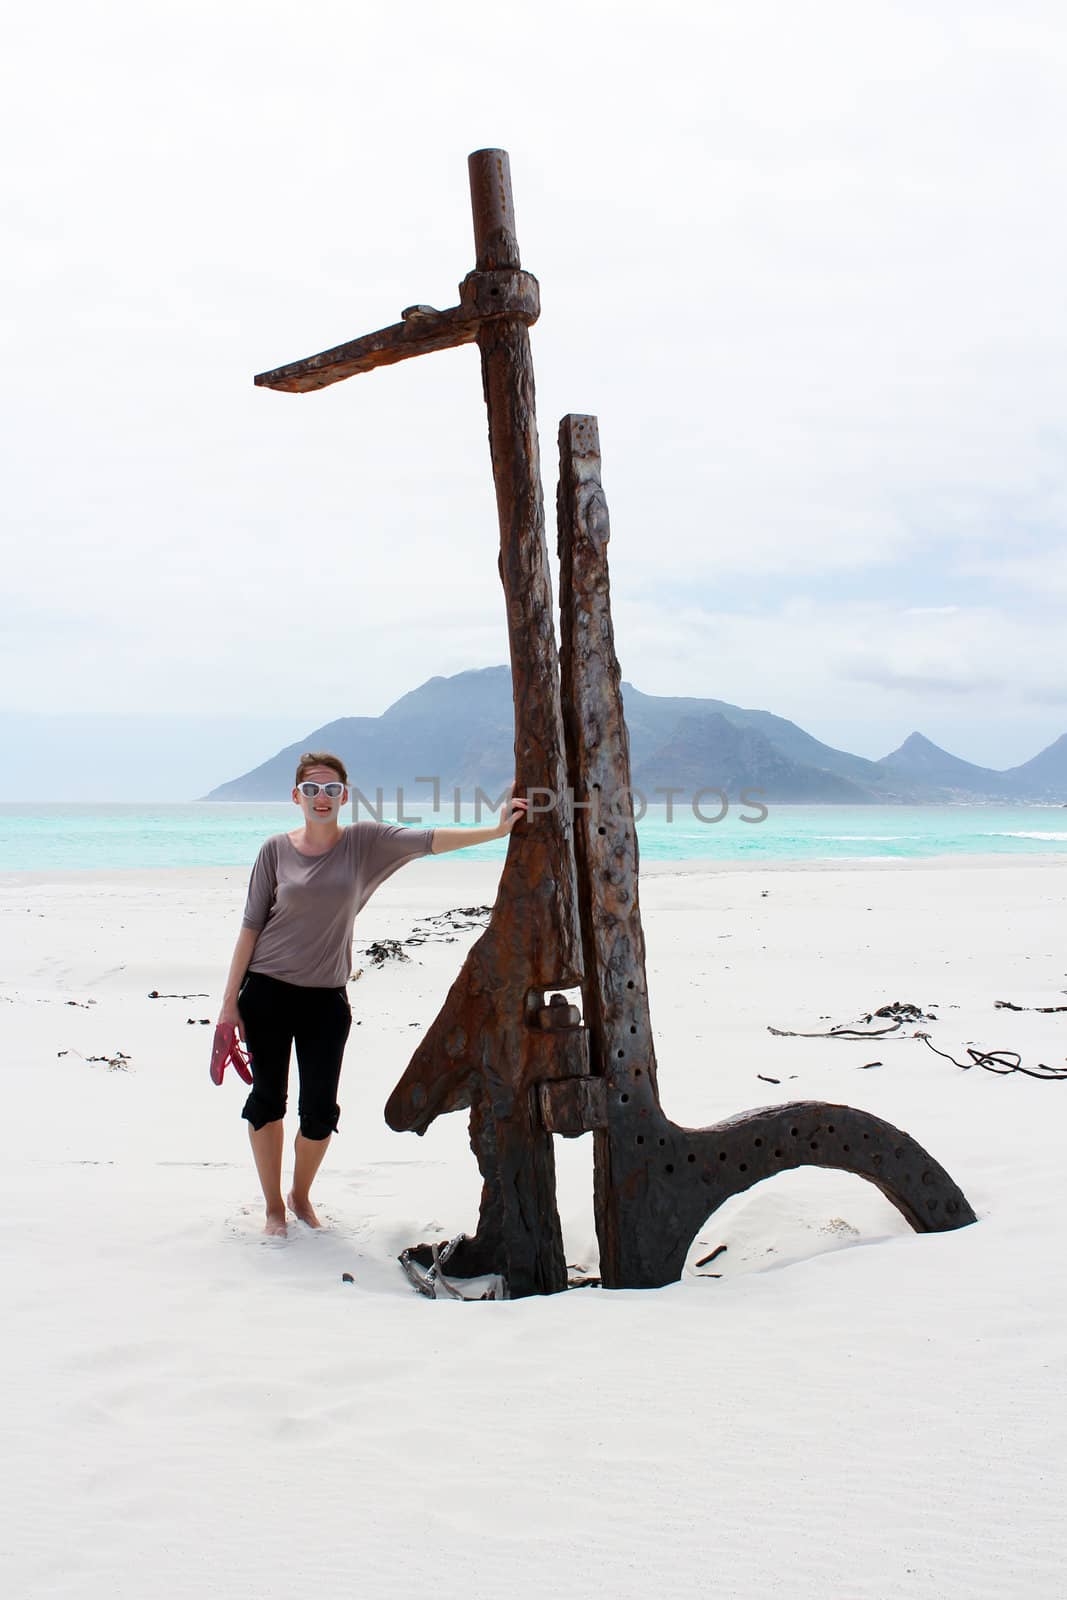 Woman standing at Shipwreck Kakapo at the beach of kommetjie by dwaschnig_photo